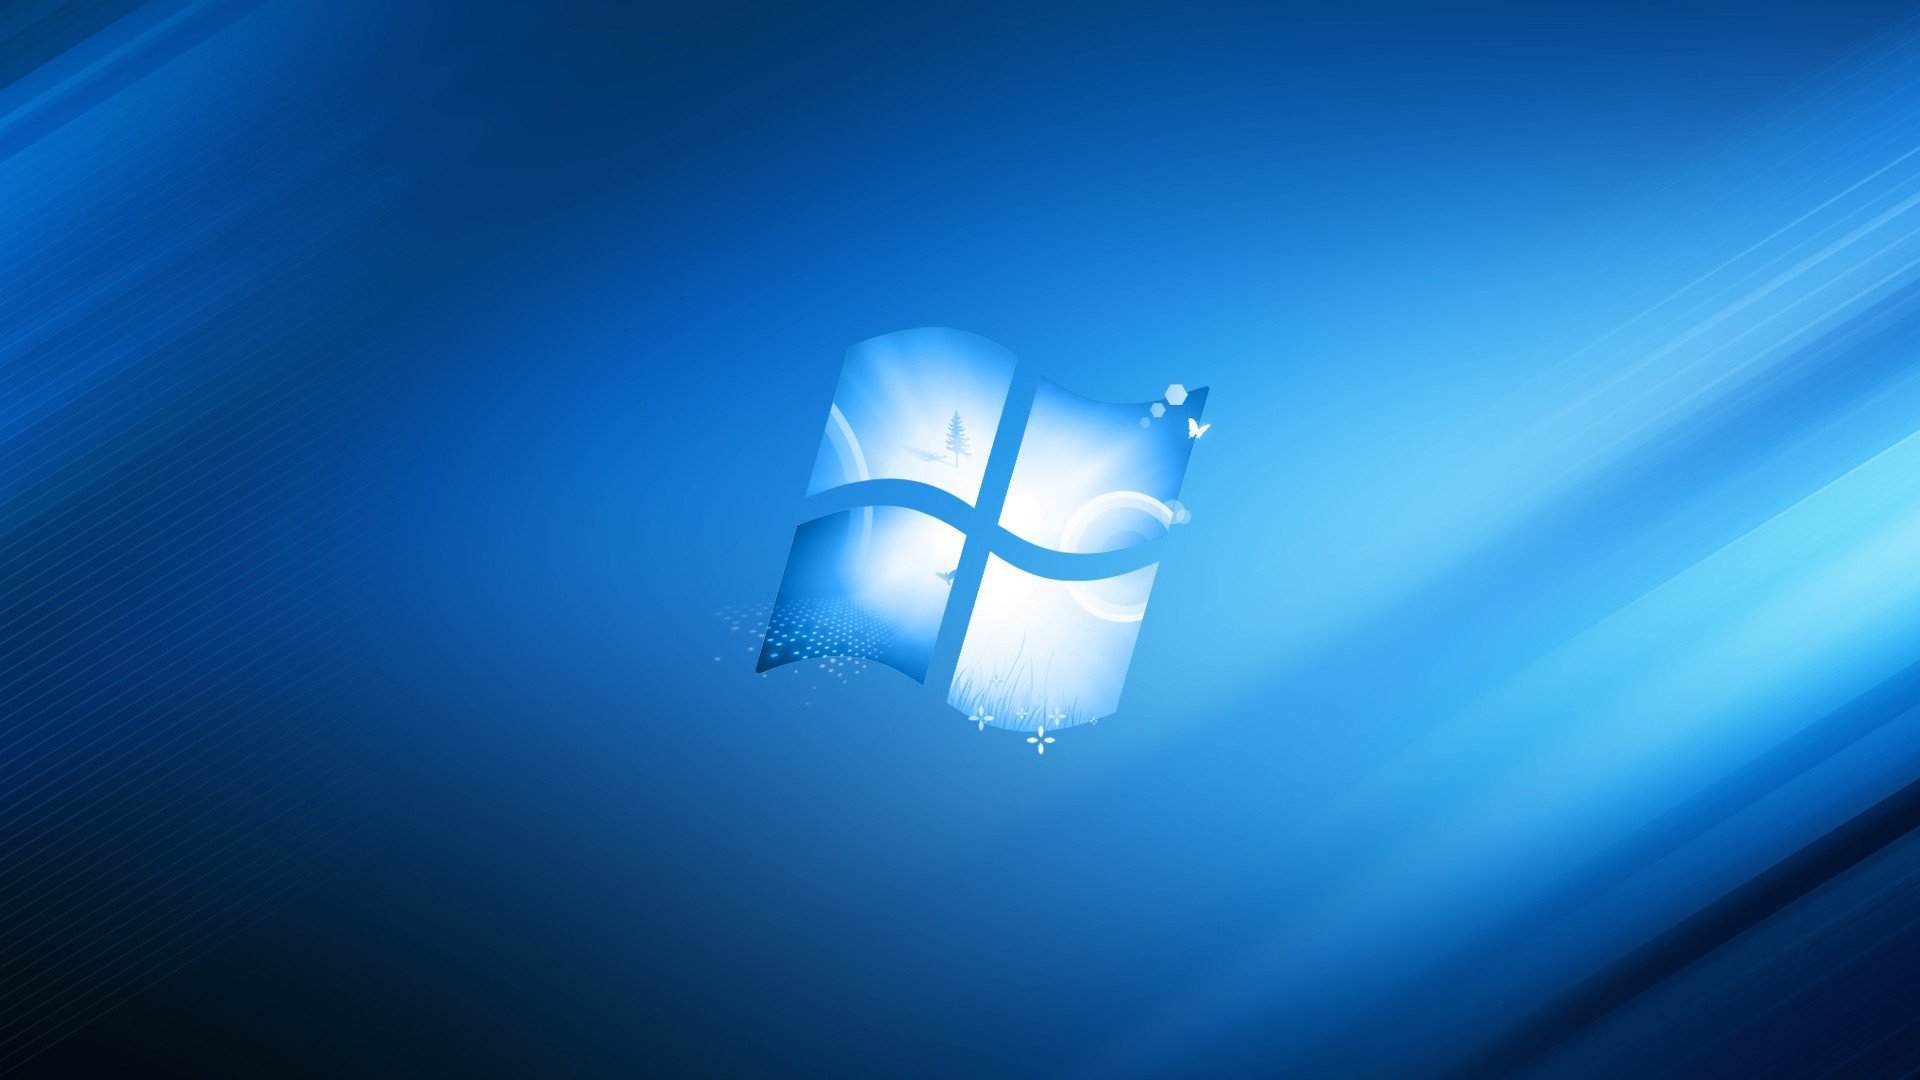 Microsoft Windows Windows 7 Operating Systems Wallpapers